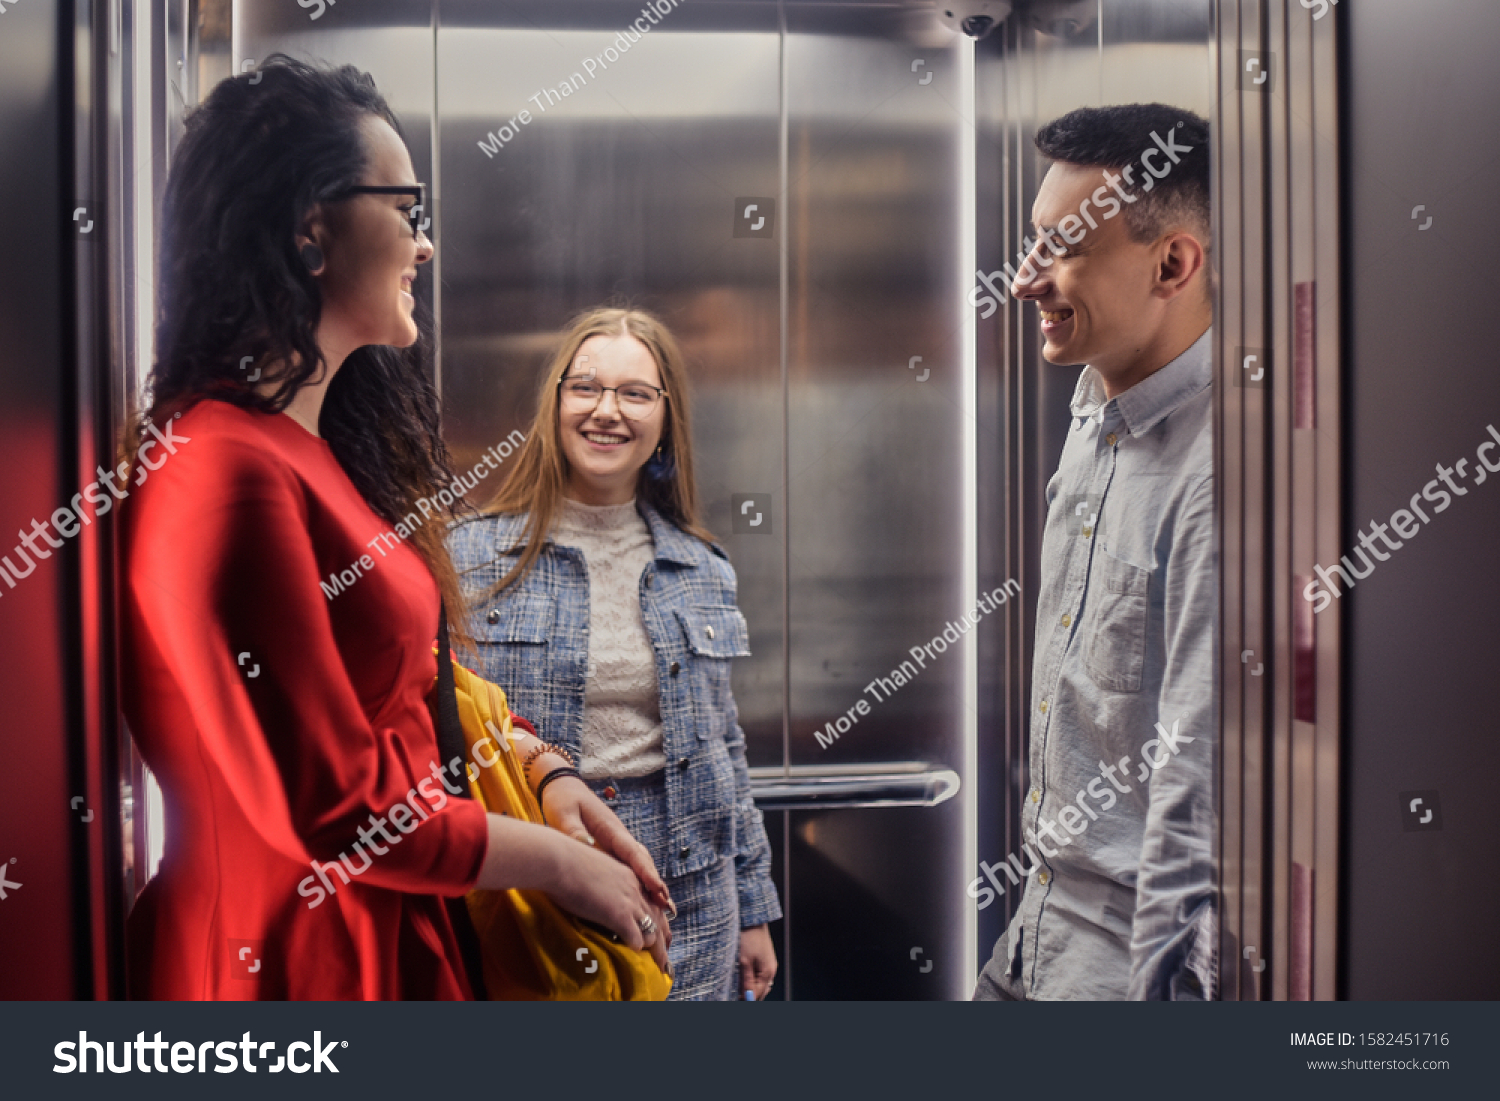 The girls and the guy ride in the elevator. Students go to study. People in the elevator. Elevator with people, communication in public places. Colleagues go to work in the elevator. #1582451716